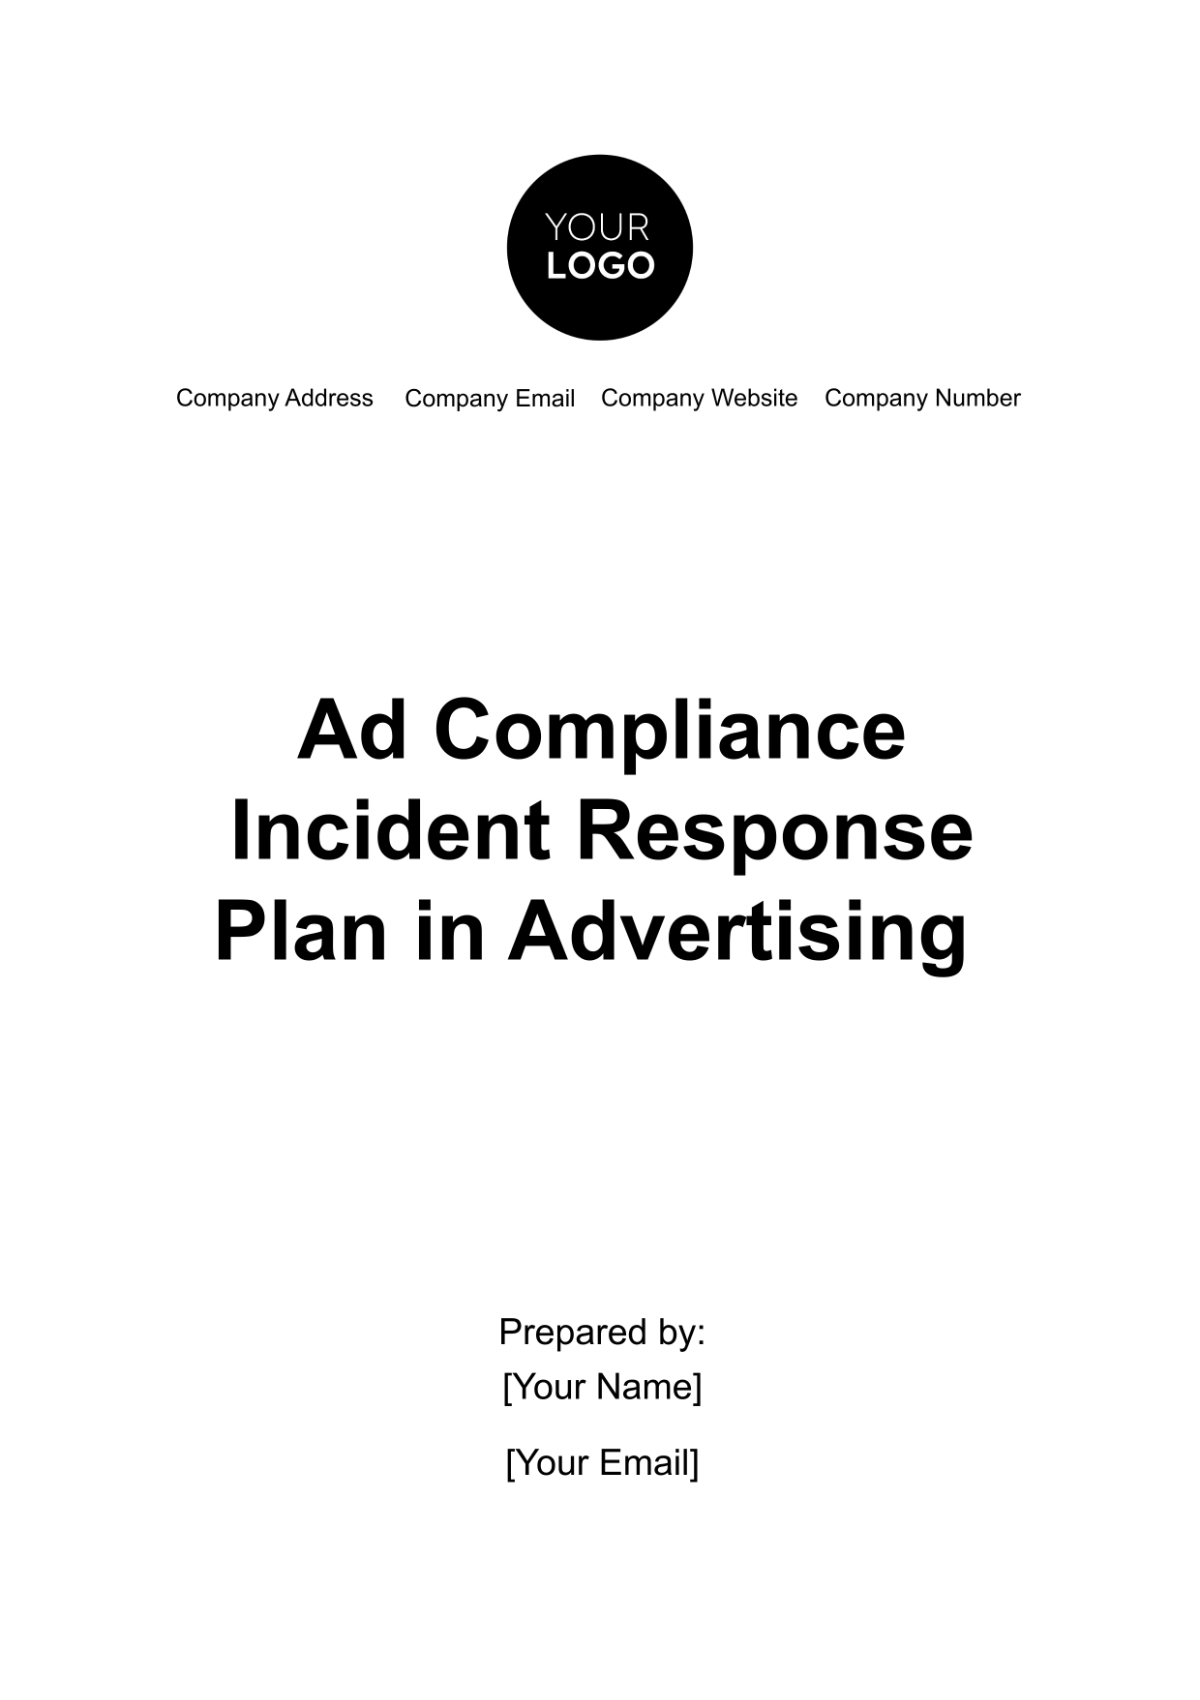 Free Ad Compliance Incident Response Plan in Advertising Template